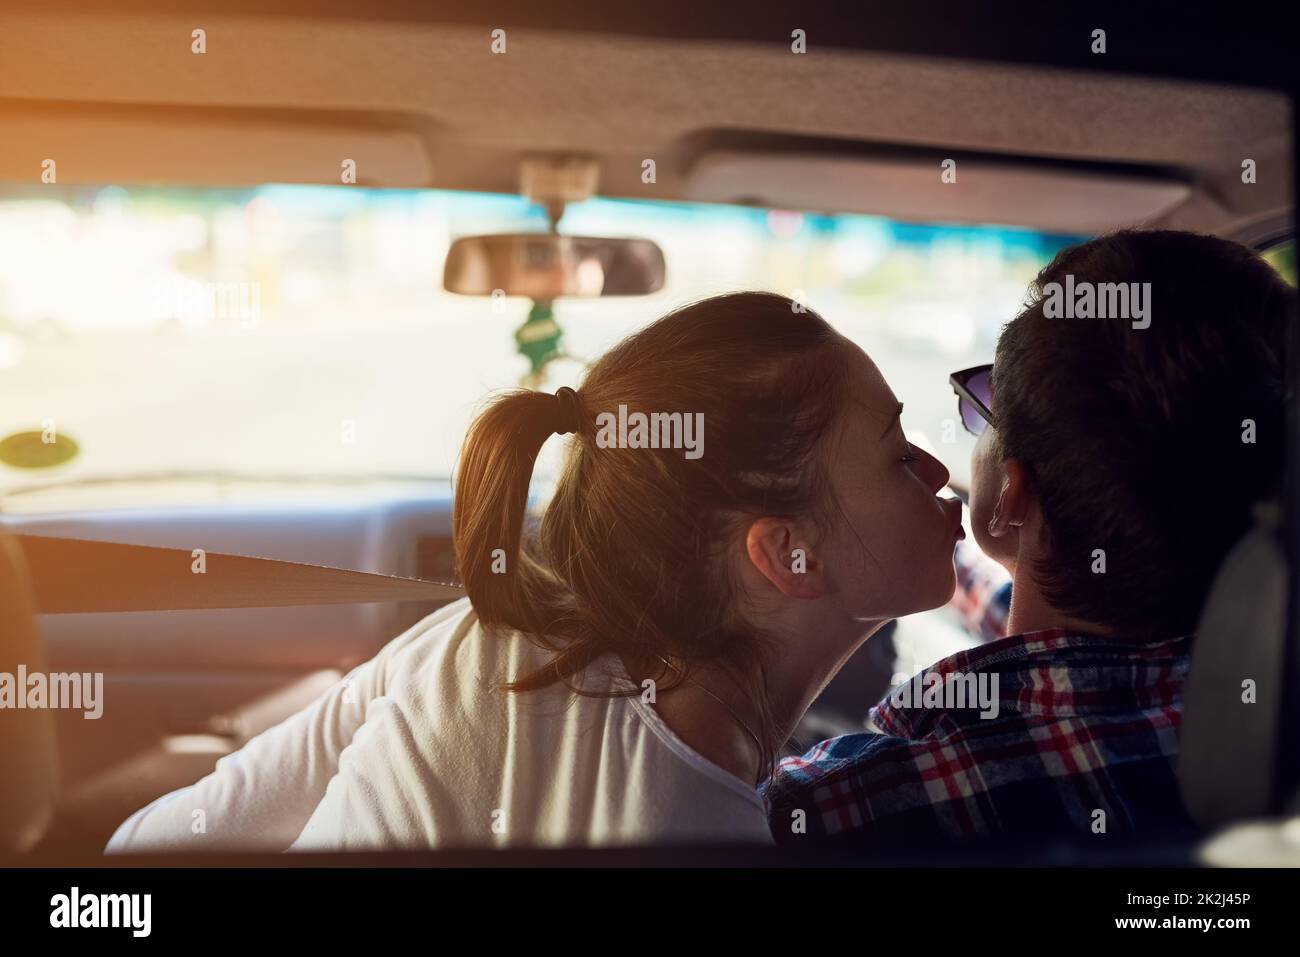 Some kisses cant wait. Rearview shot of a young woman kissing her boyfriend while he drives a car. Stock Photo